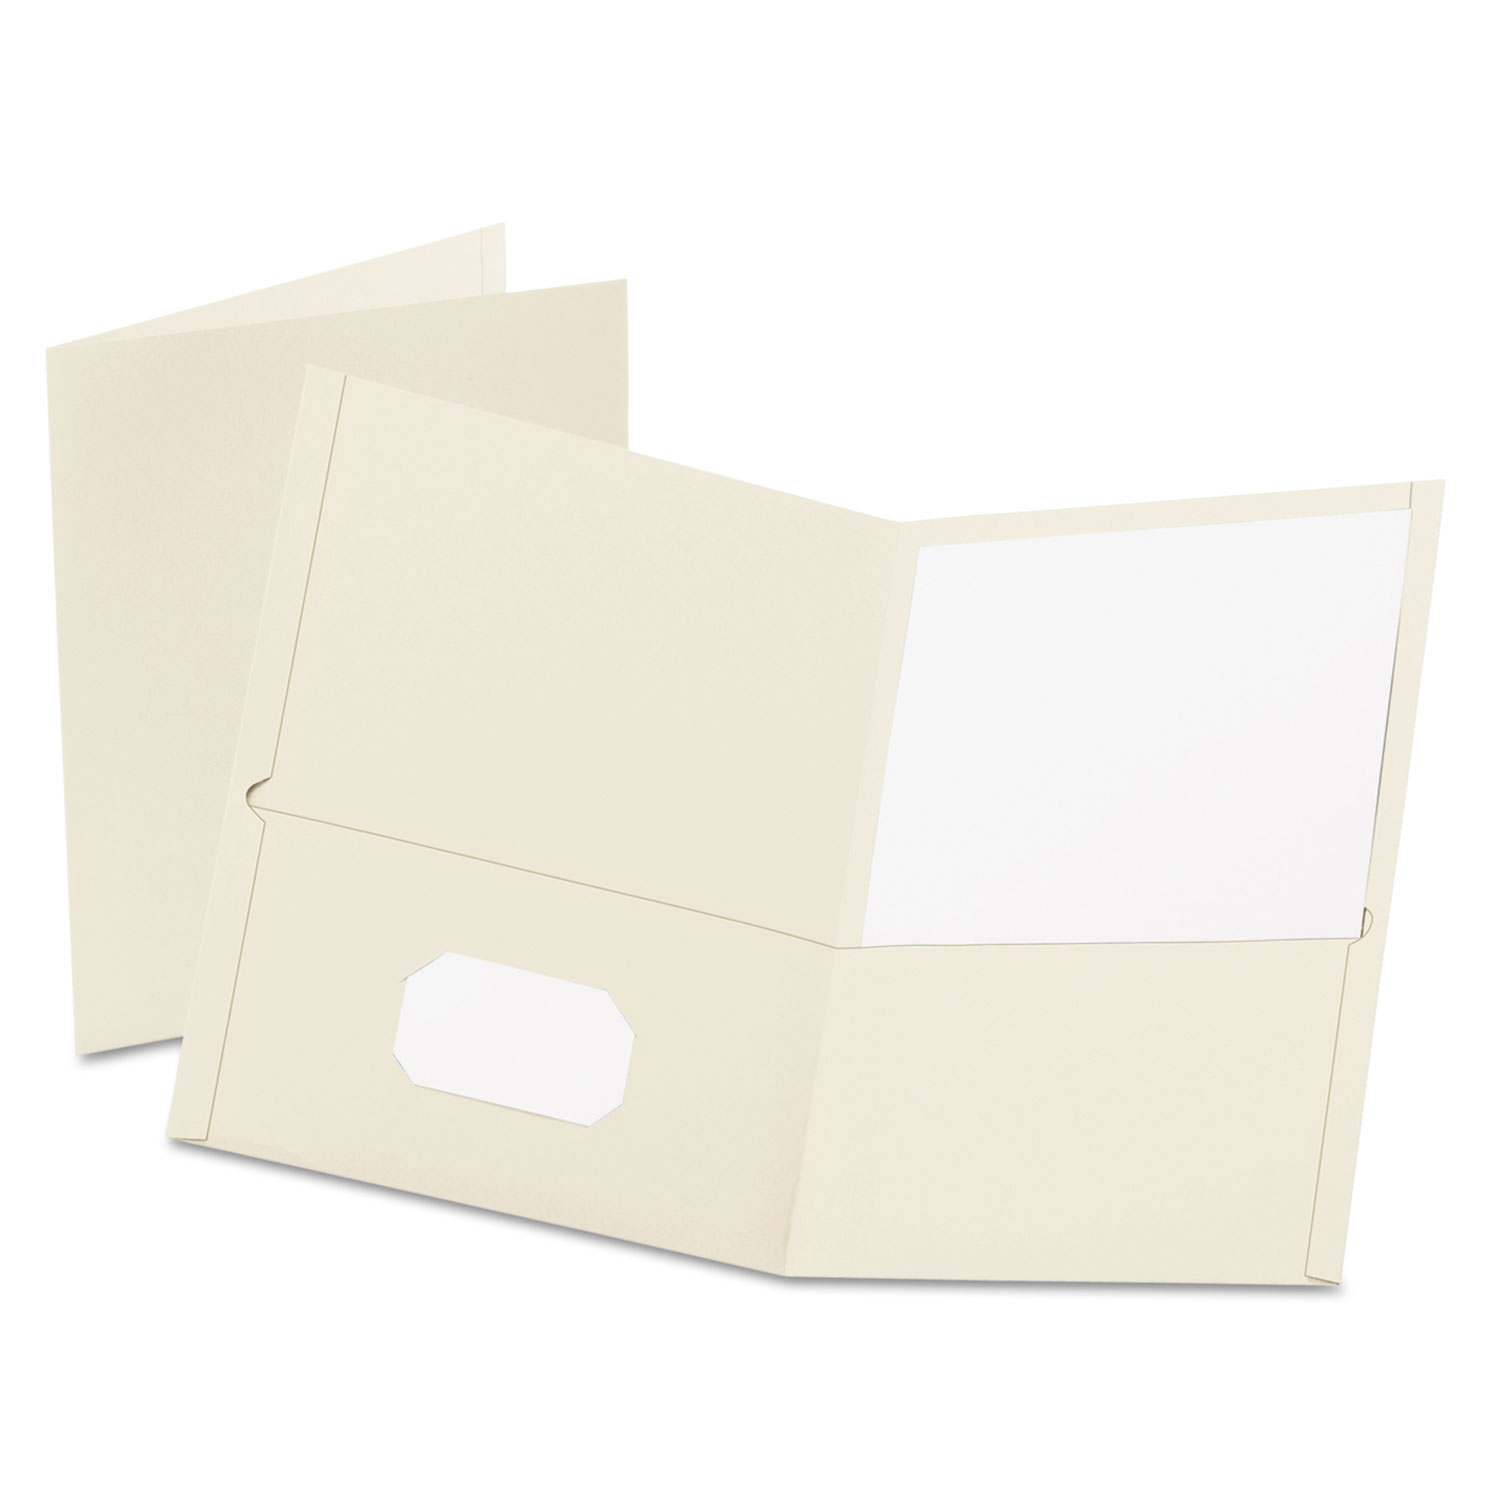 Twin-Pocket Folders Holds 100 Sheets Green Box of 25 Textured Paper Letter Size 